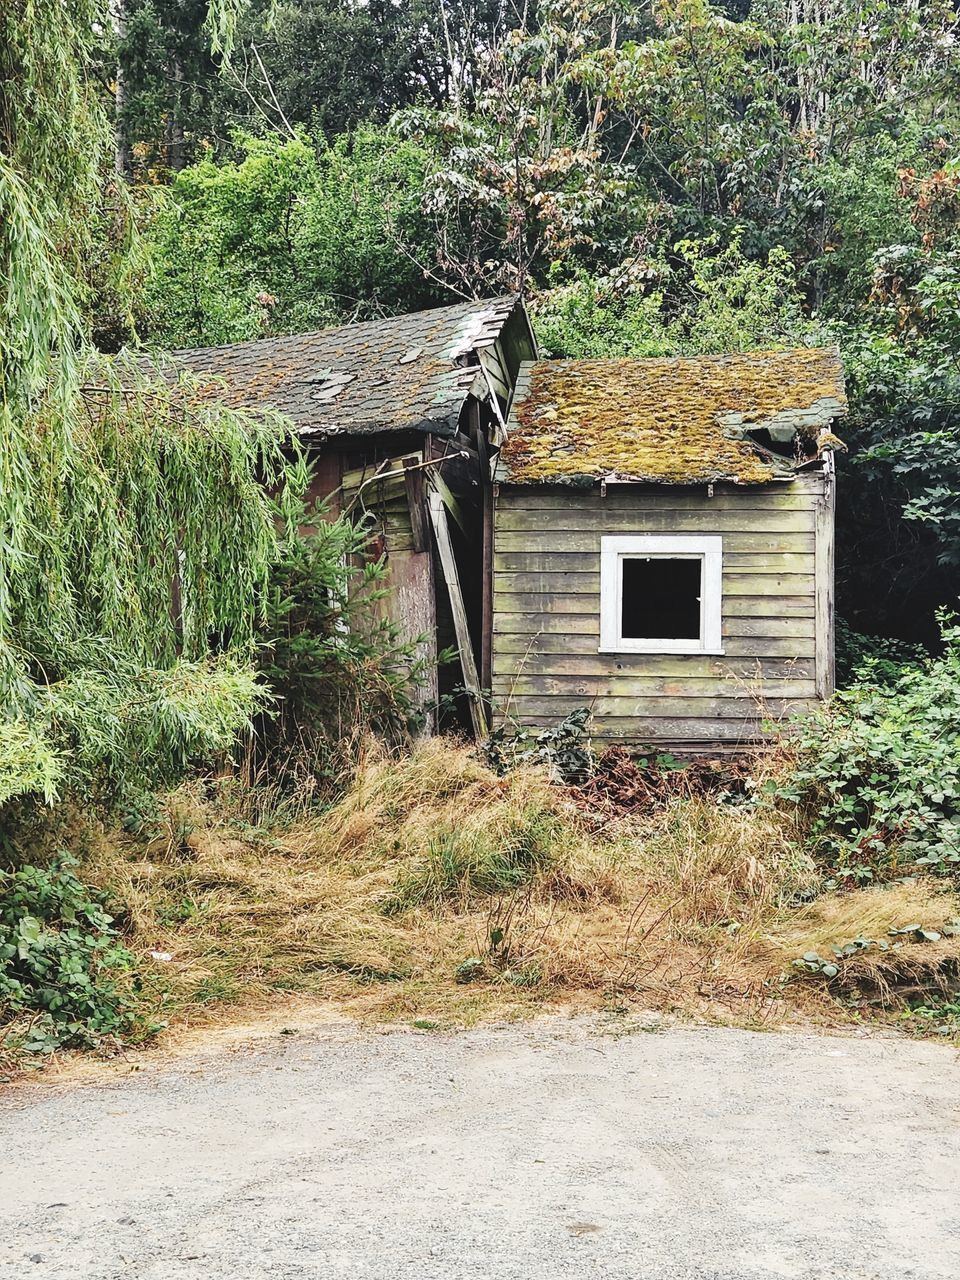 built structure, architecture, plant, building exterior, tree, building, no people, day, house, nature, growth, rural area, hut, land, shack, cottage, abandoned, outdoors, wood, green, old, residential district, landscape, shed, home, entrance, forest, field